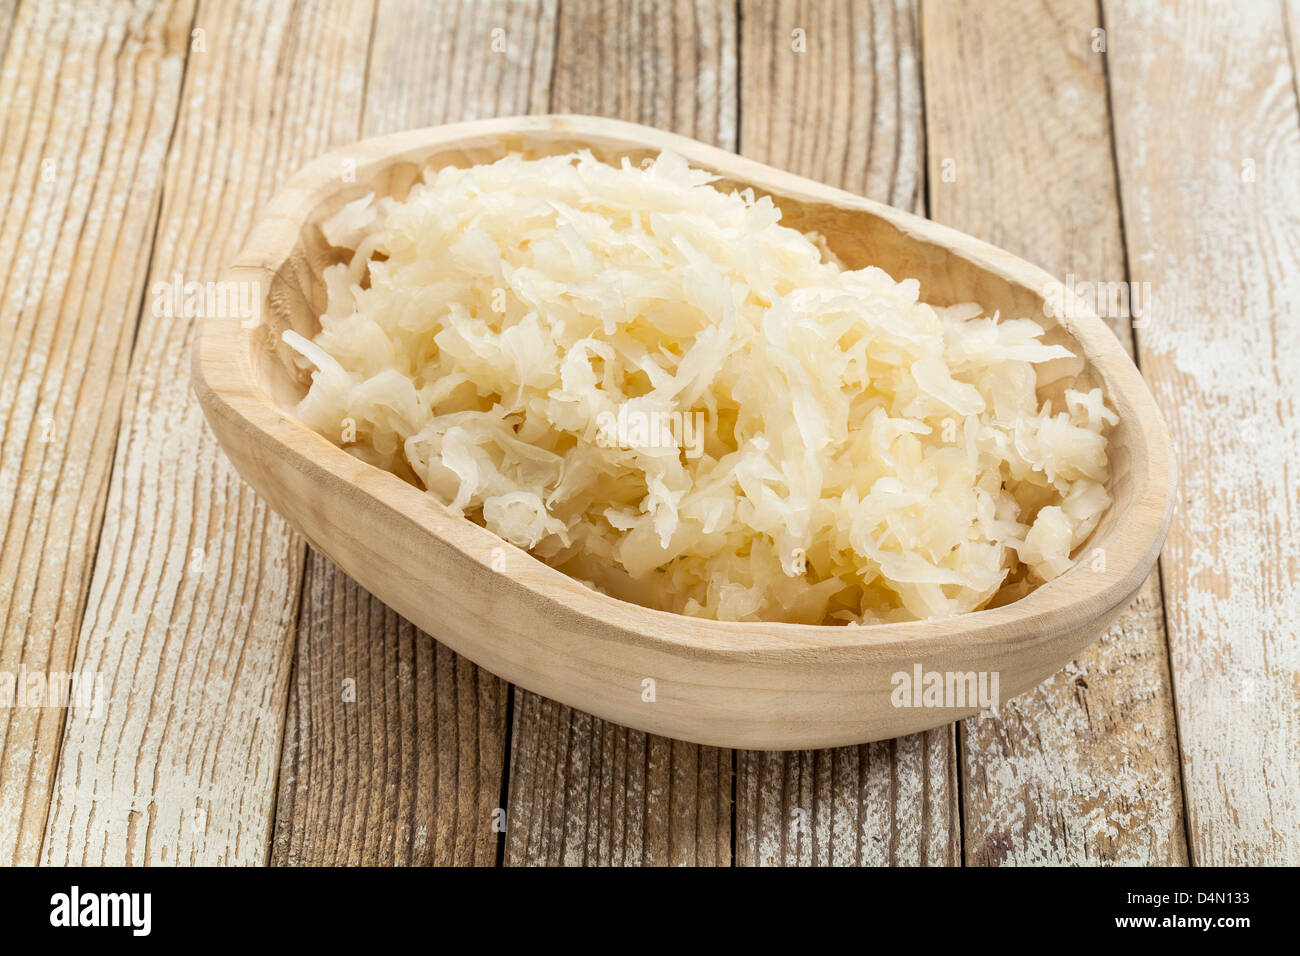 sauerkraut in a rustic wooden bowl against white painted wooden background Stock Photo